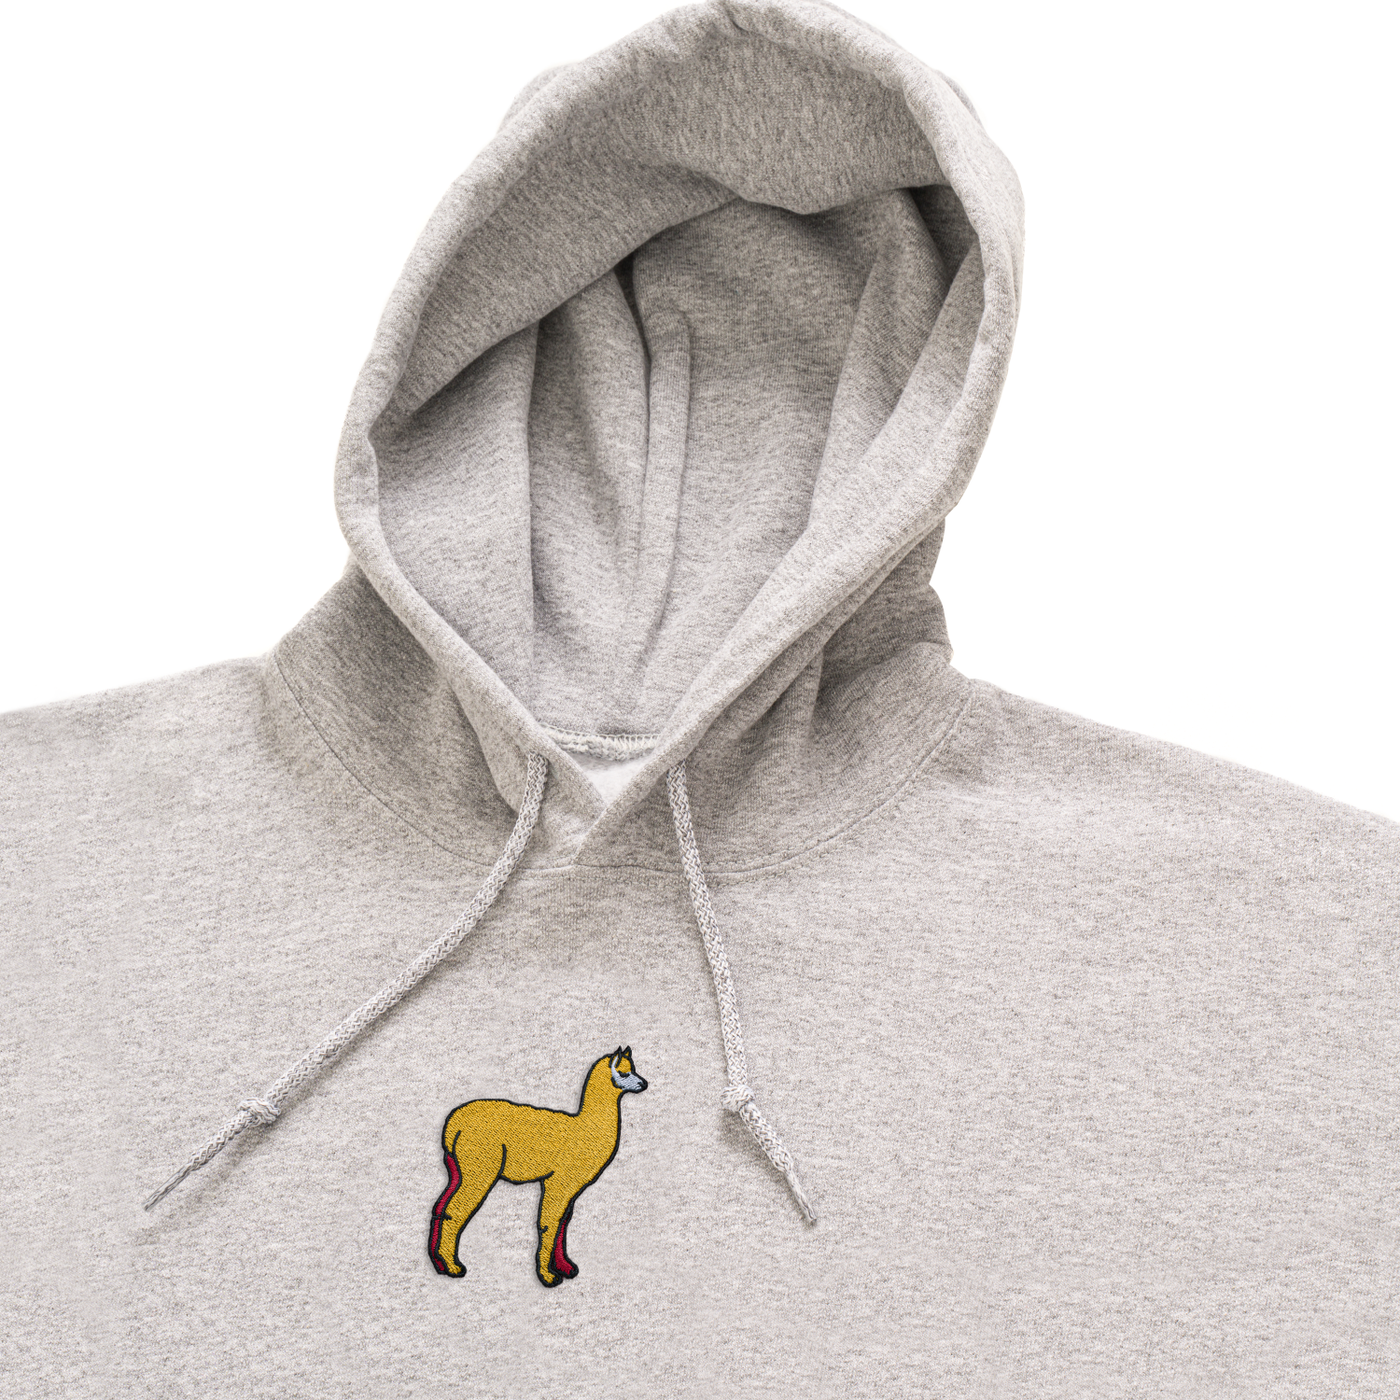 Bobby's Planet Men's Embroidered Alpaca Hoodie from South American Amazon Animals Collection in Sport Grey Color#color_sport-grey